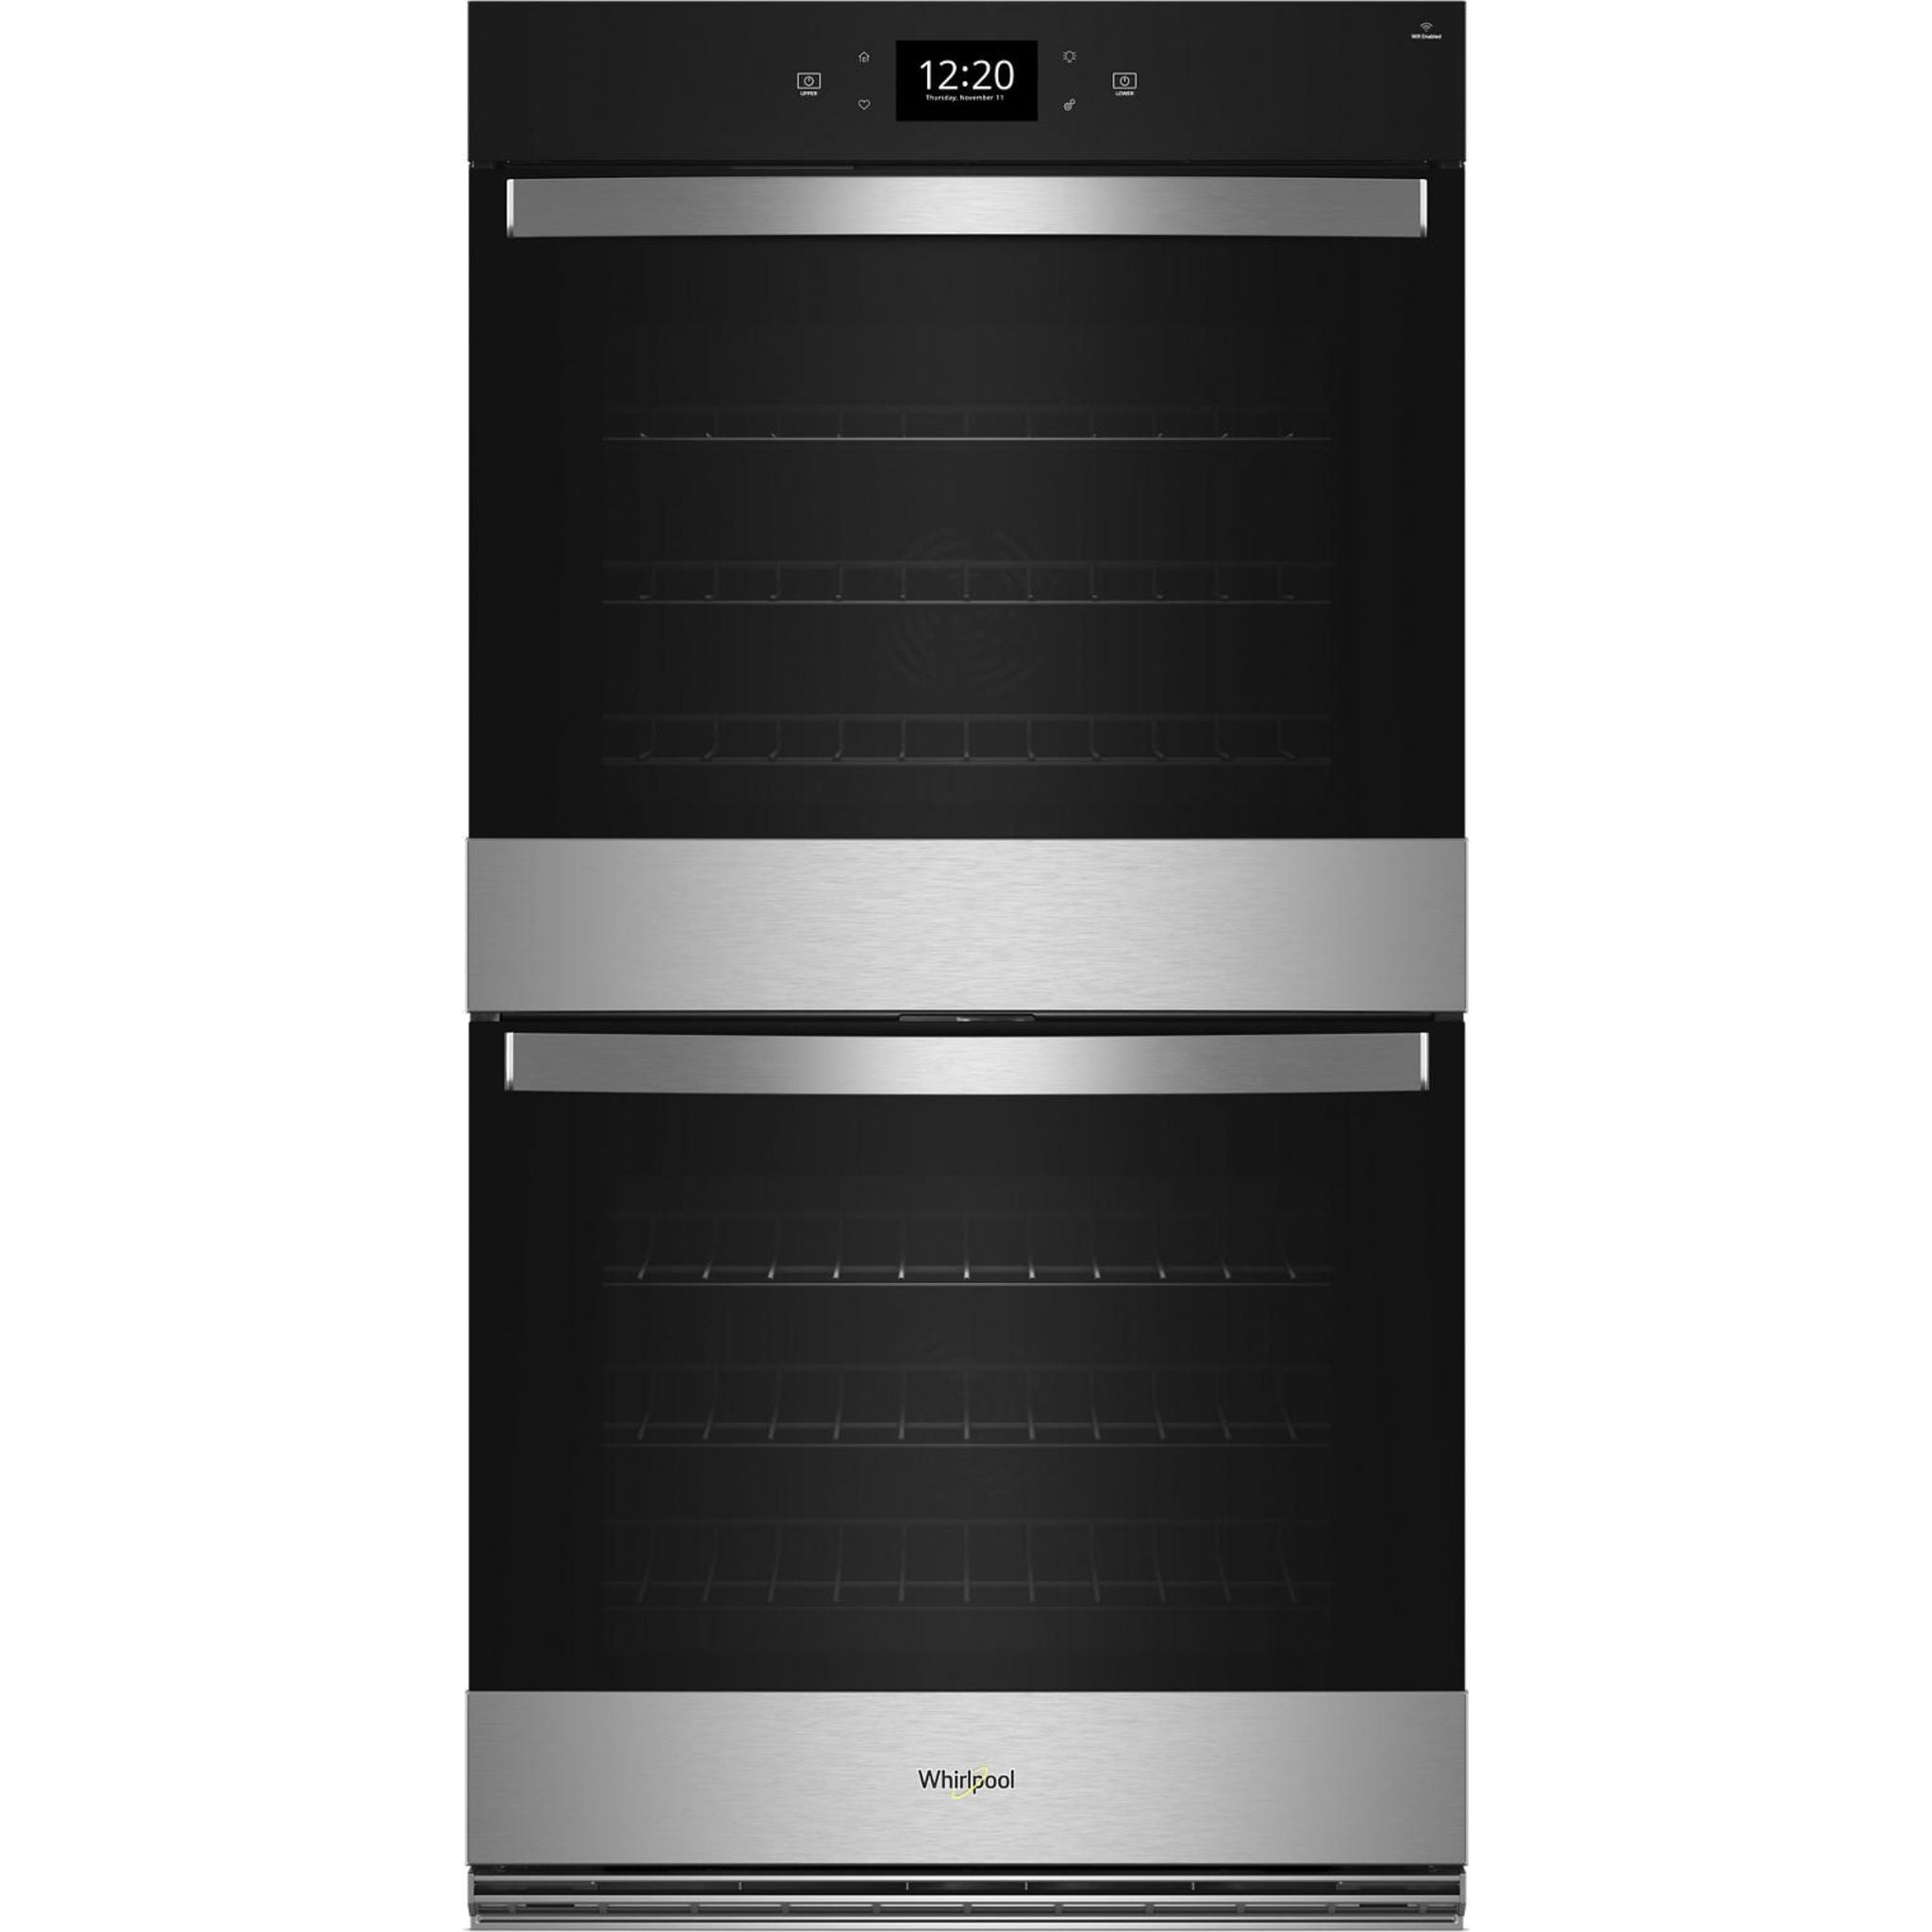 Whirlpool, 27" True Convection Wall Oven (WOED7027PZ) - Fingerprint Resistant Stainless Steel